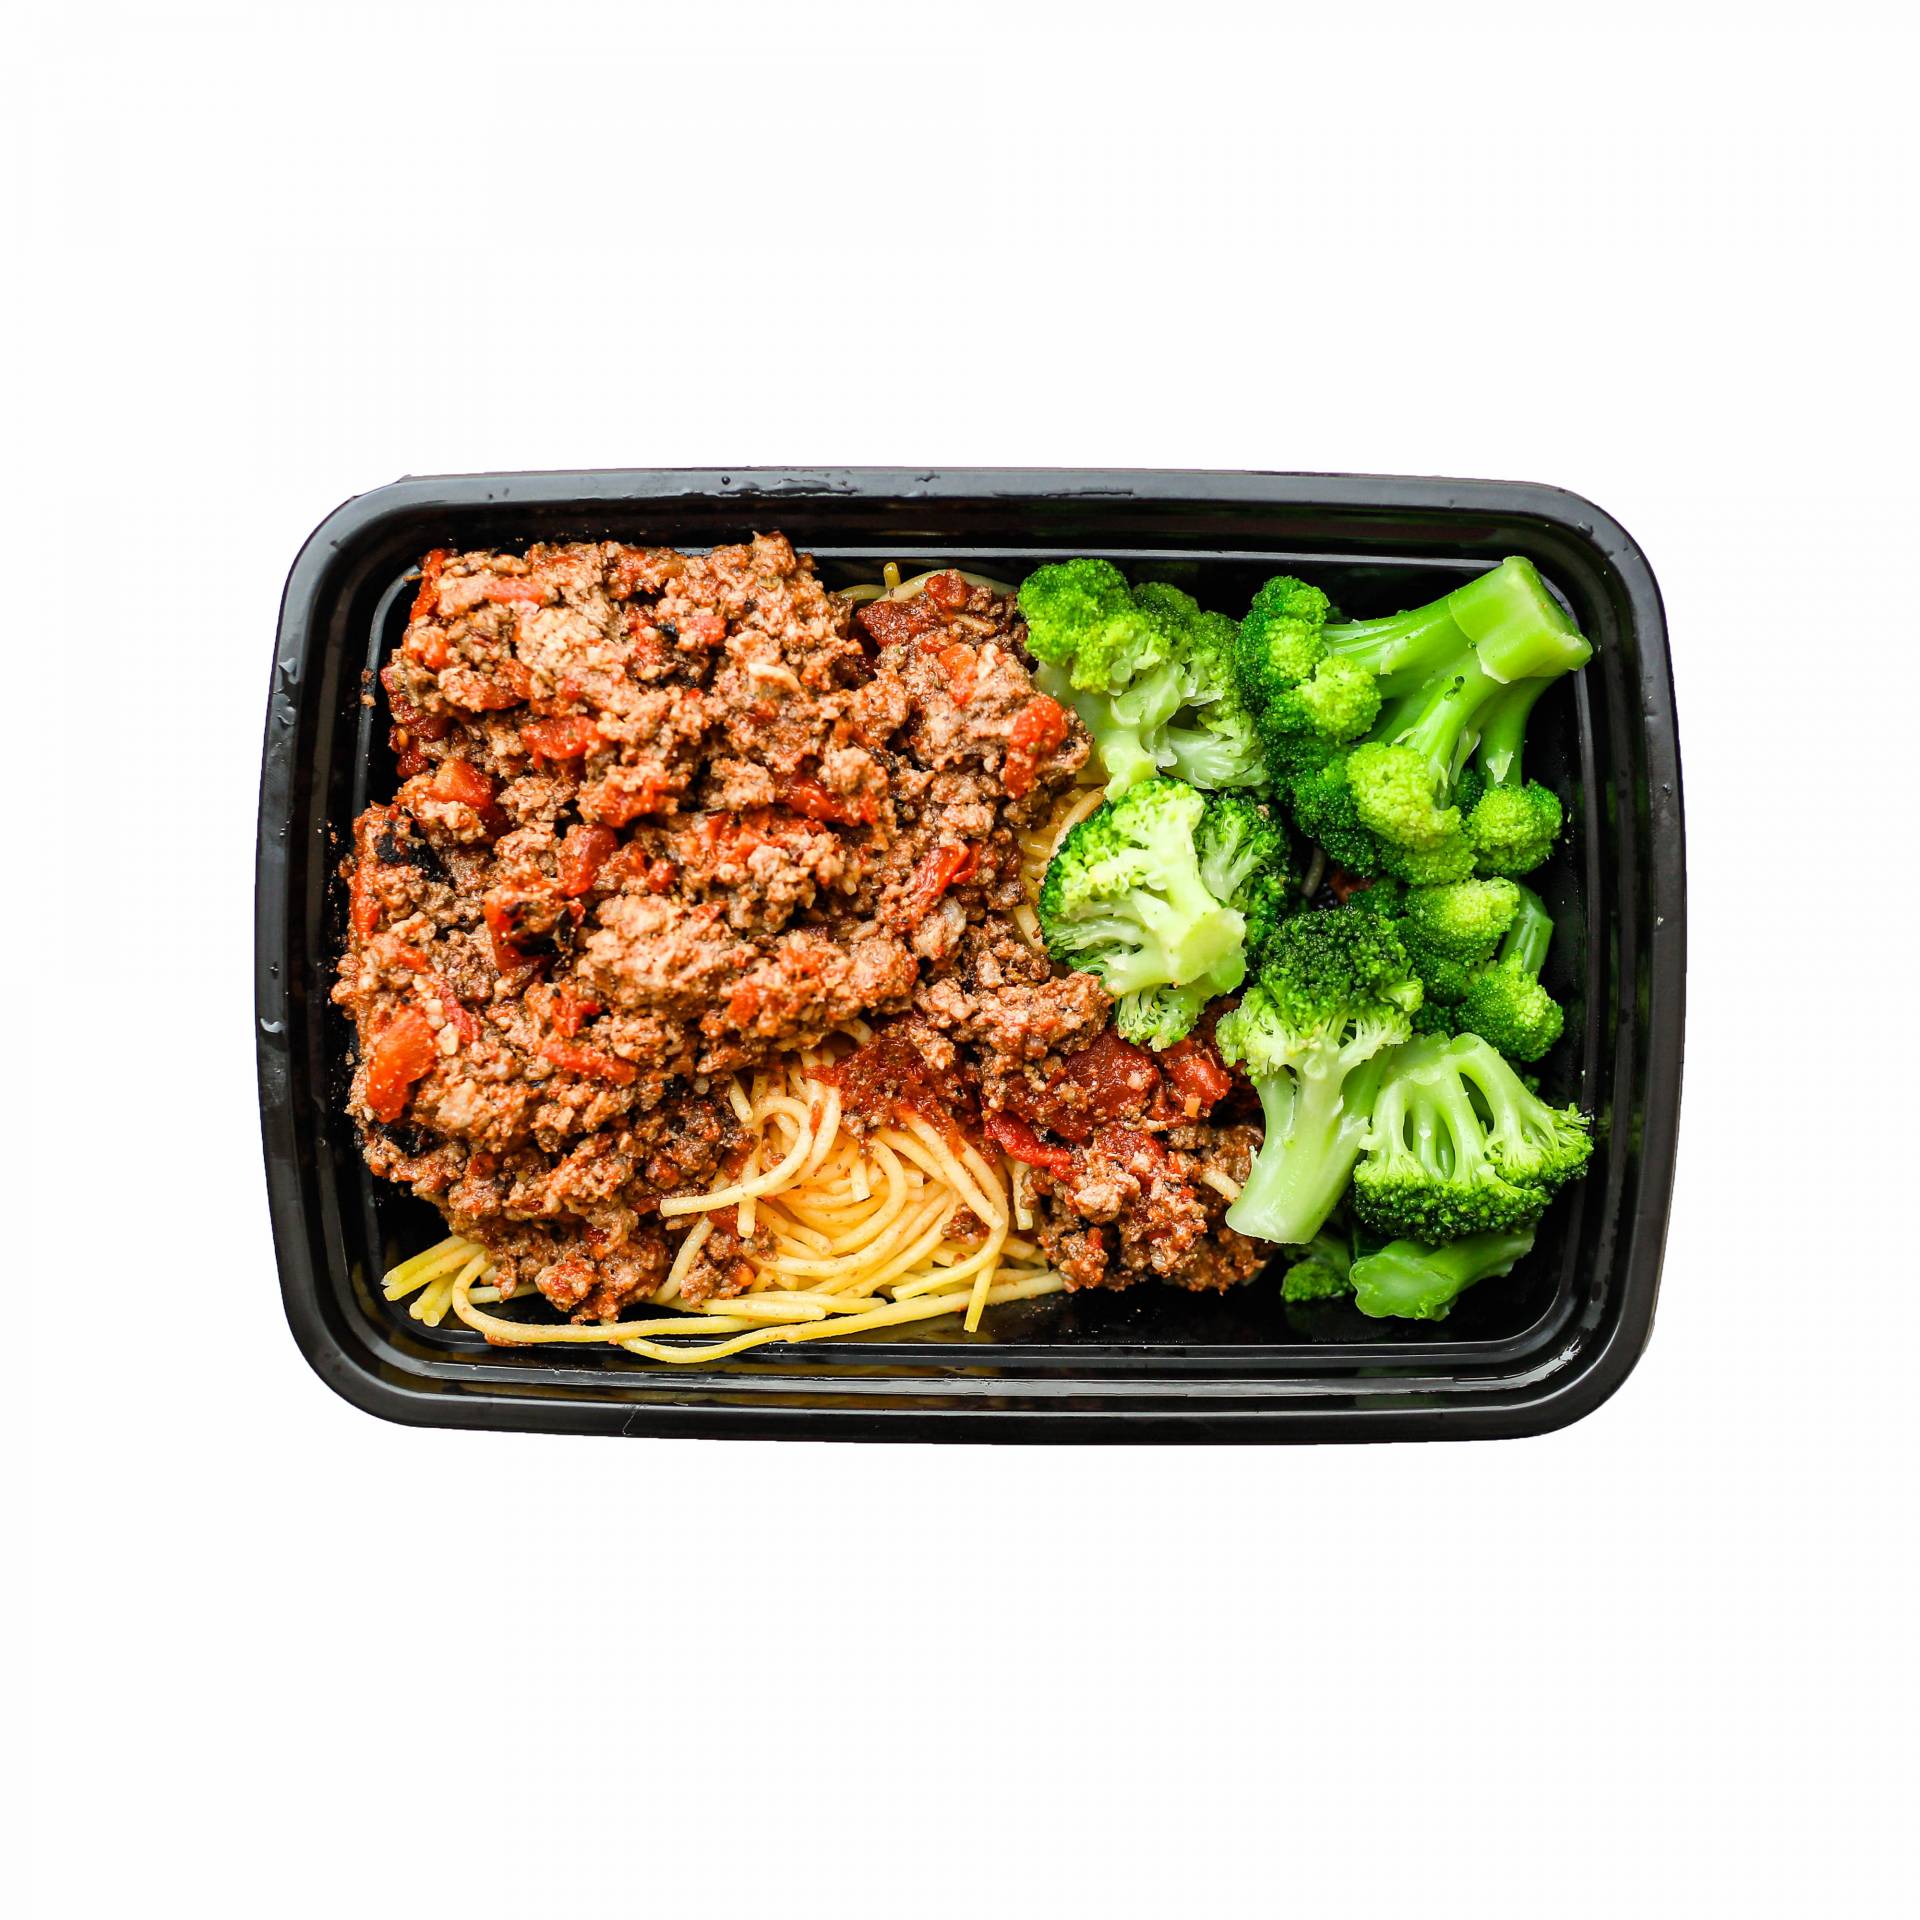 Spaghetti with Meat Sauce & Broccoli (One Size)